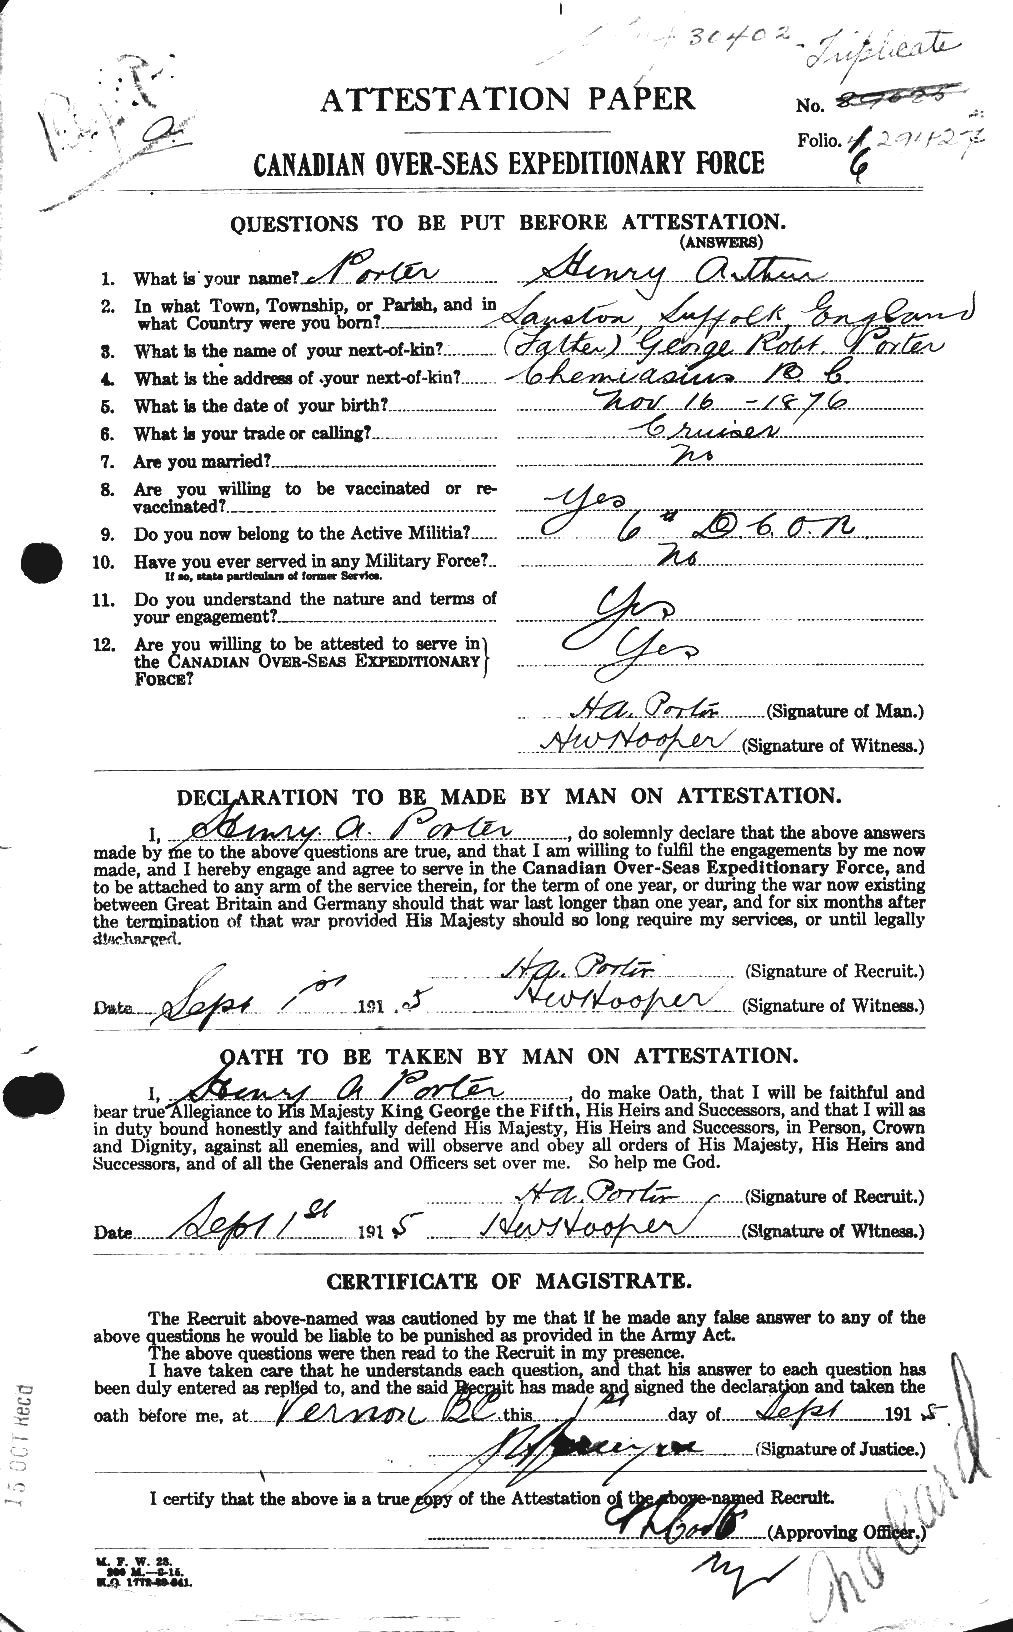 Personnel Records of the First World War - CEF 583634a